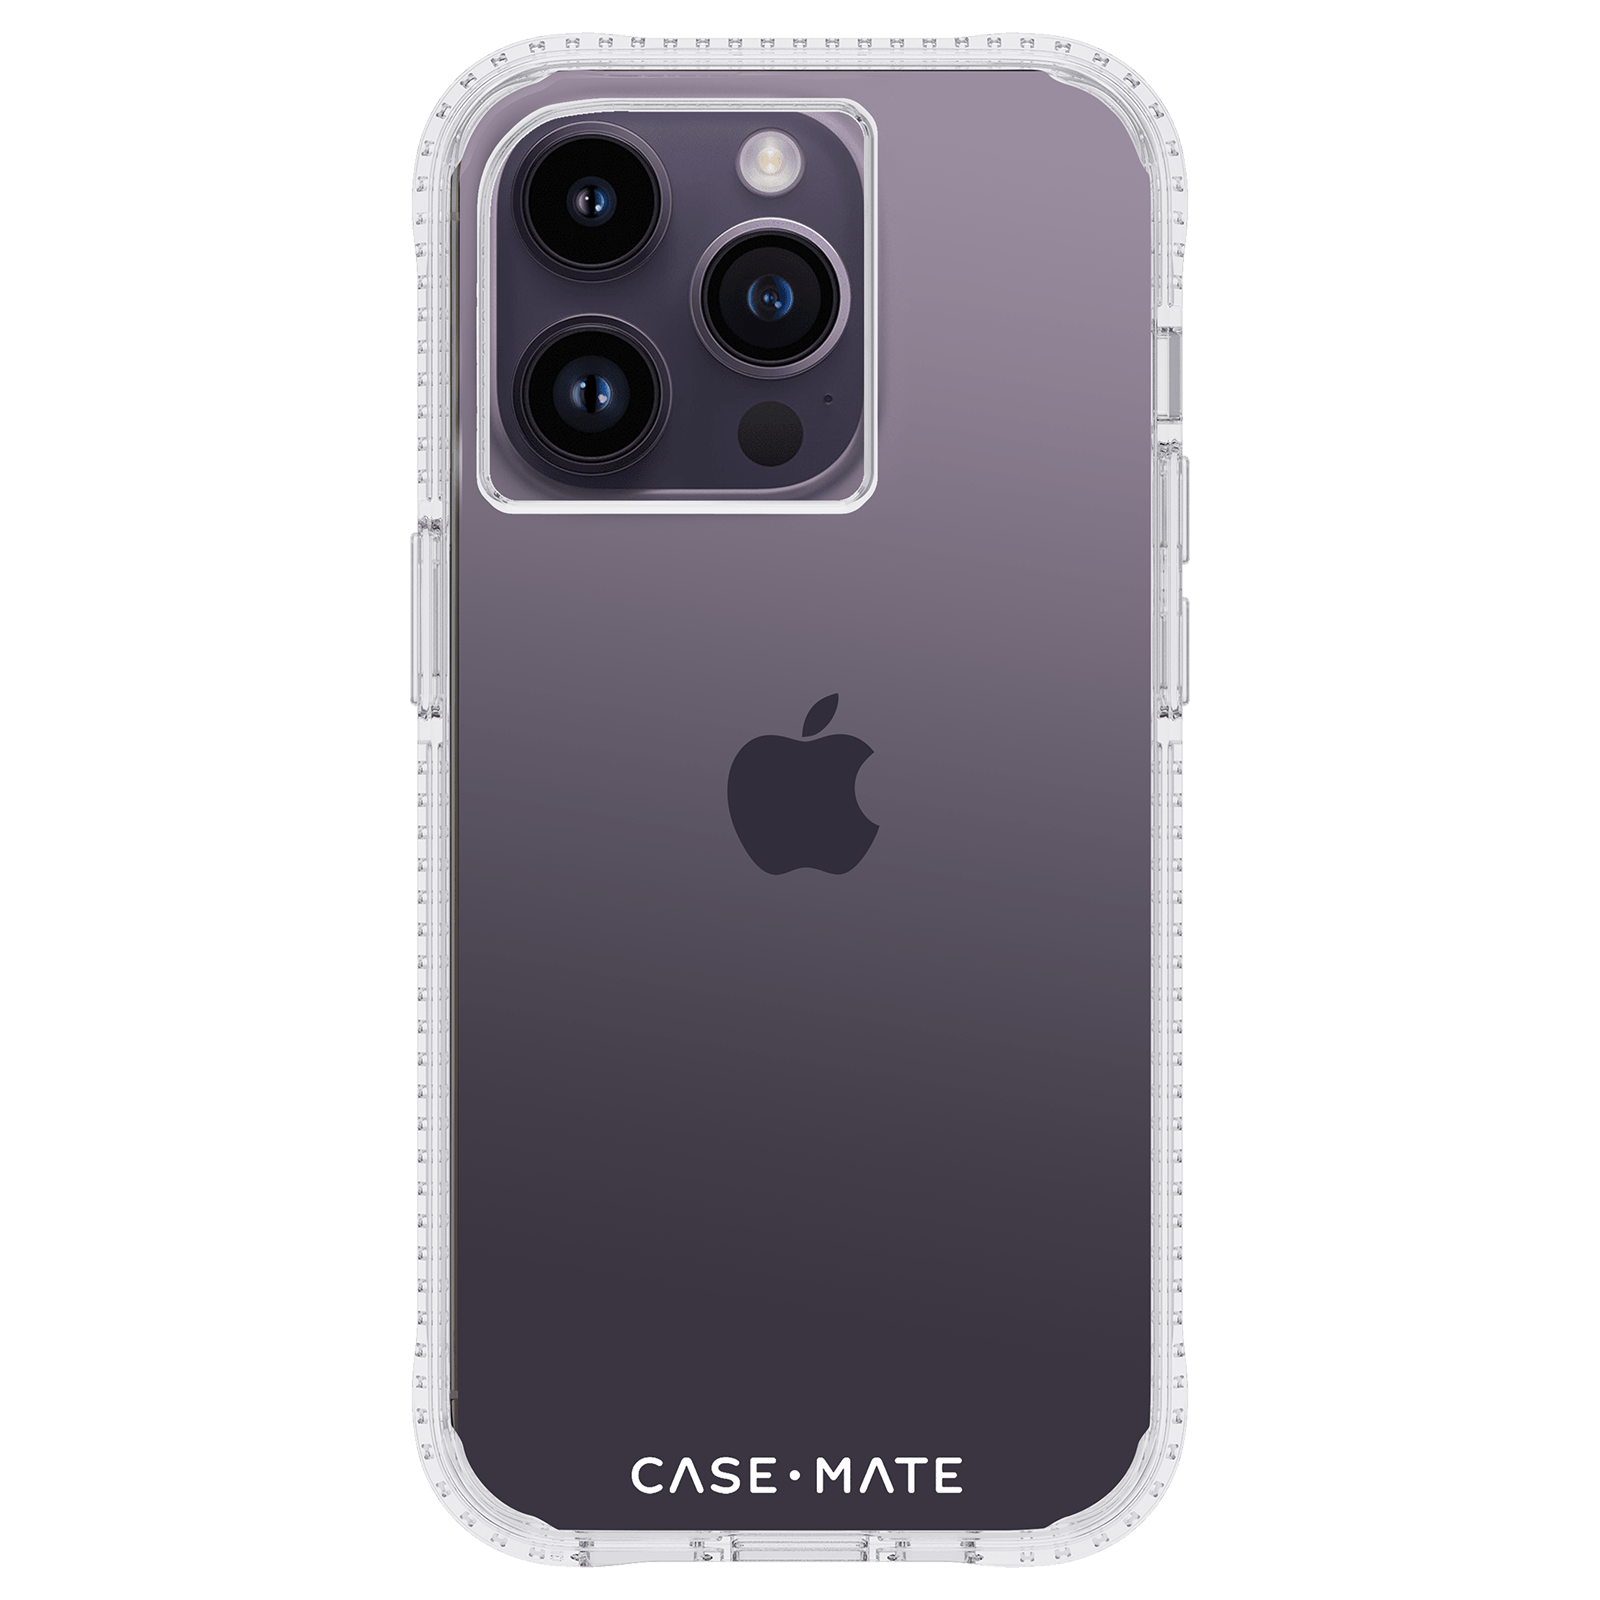 Case-Mate Tough Plus Series Apple iPhone 14 Pro Case [Wireless Charging Compatible] 15ft. Drop Protection - Clear